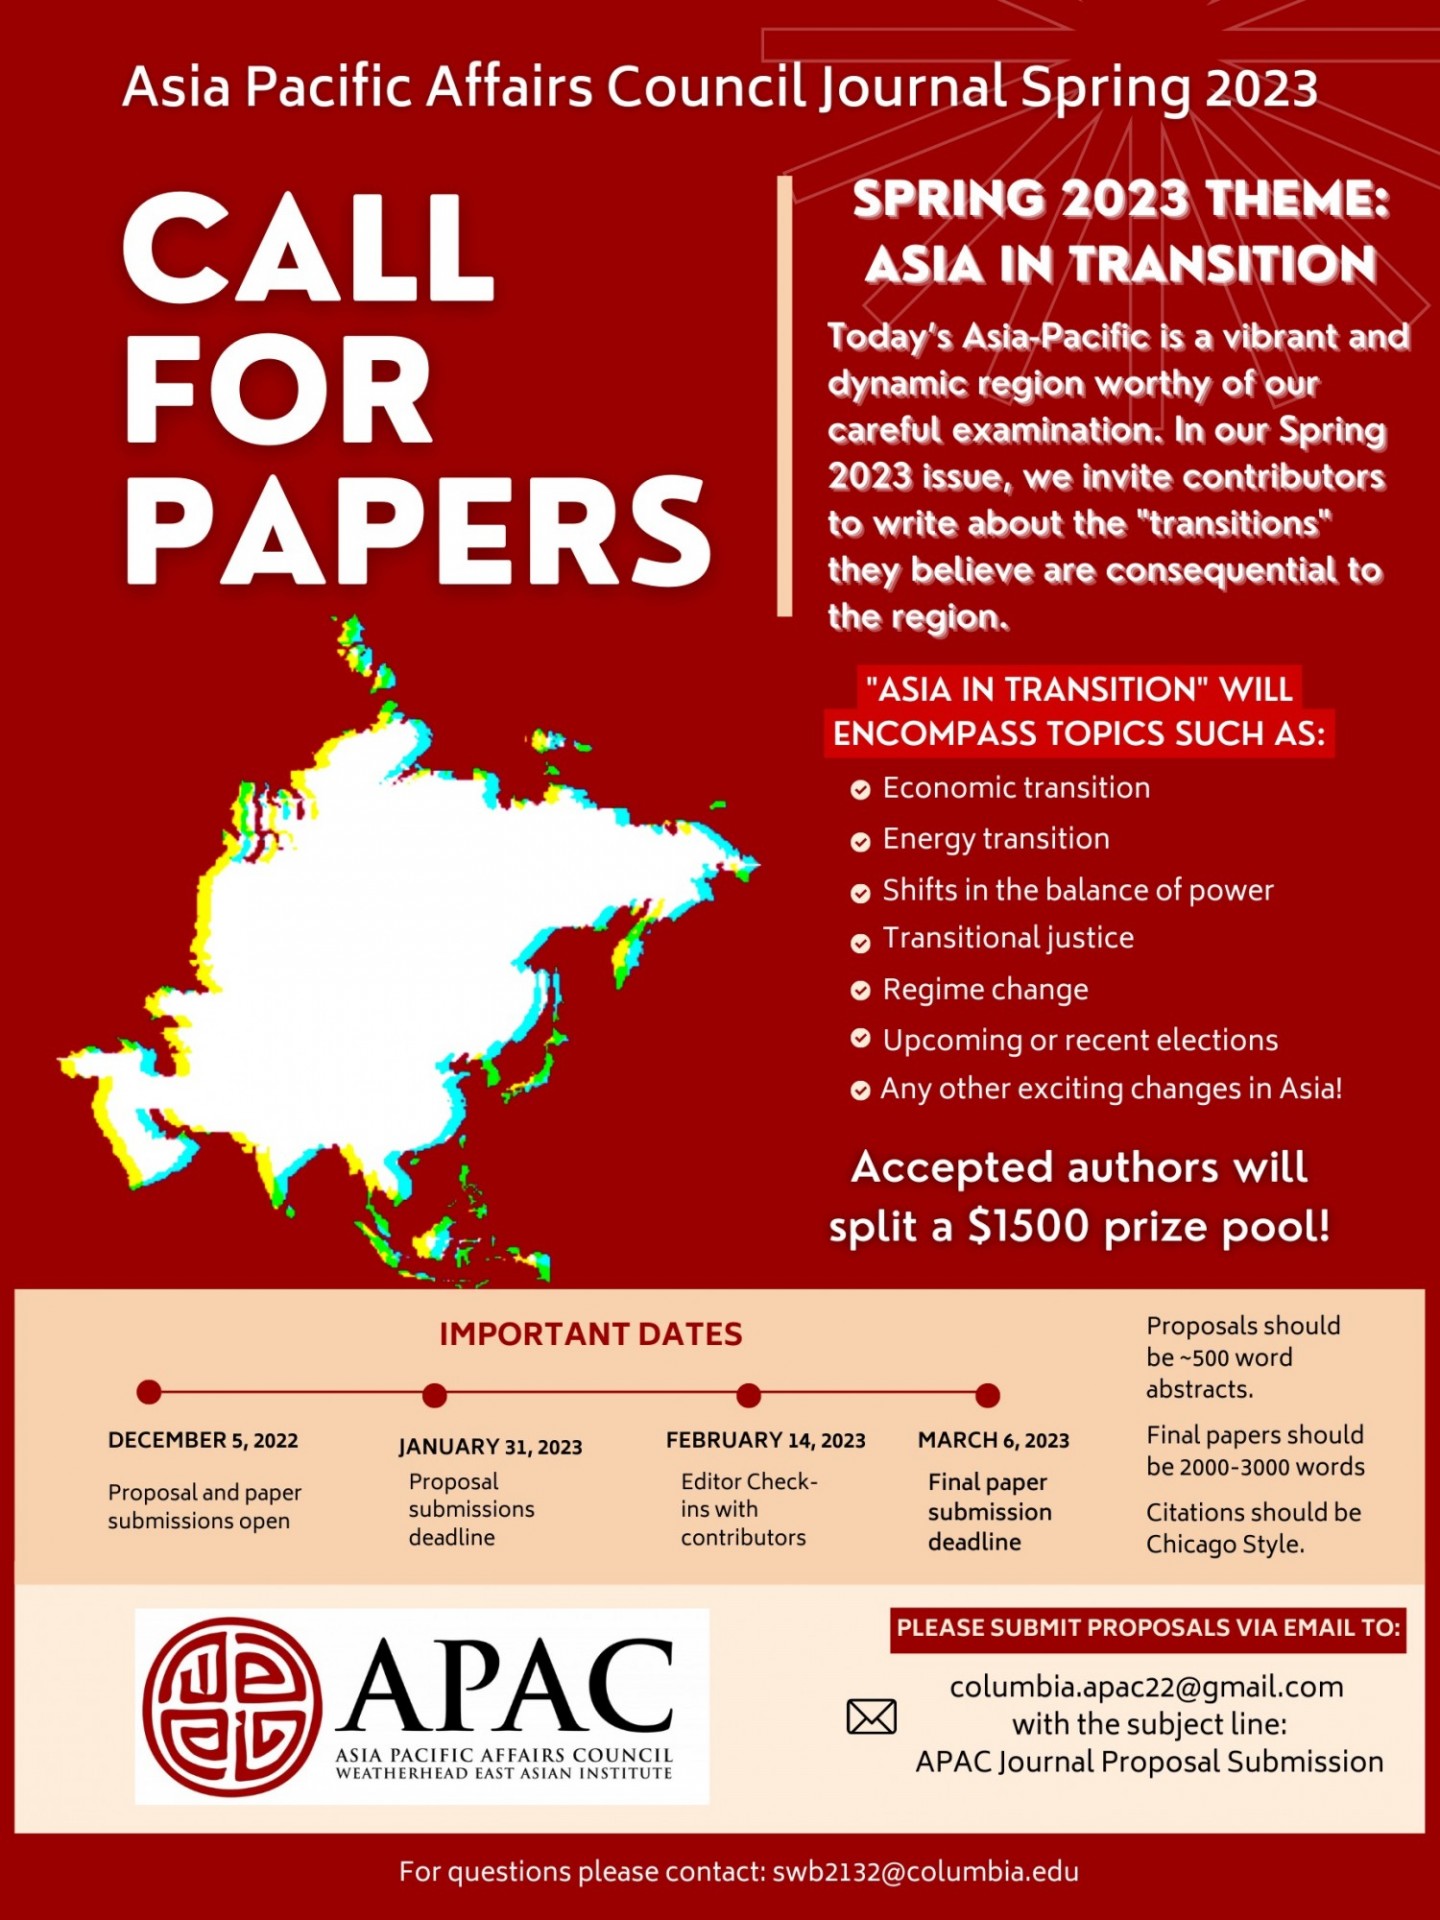 APAC Journal Call for Papers